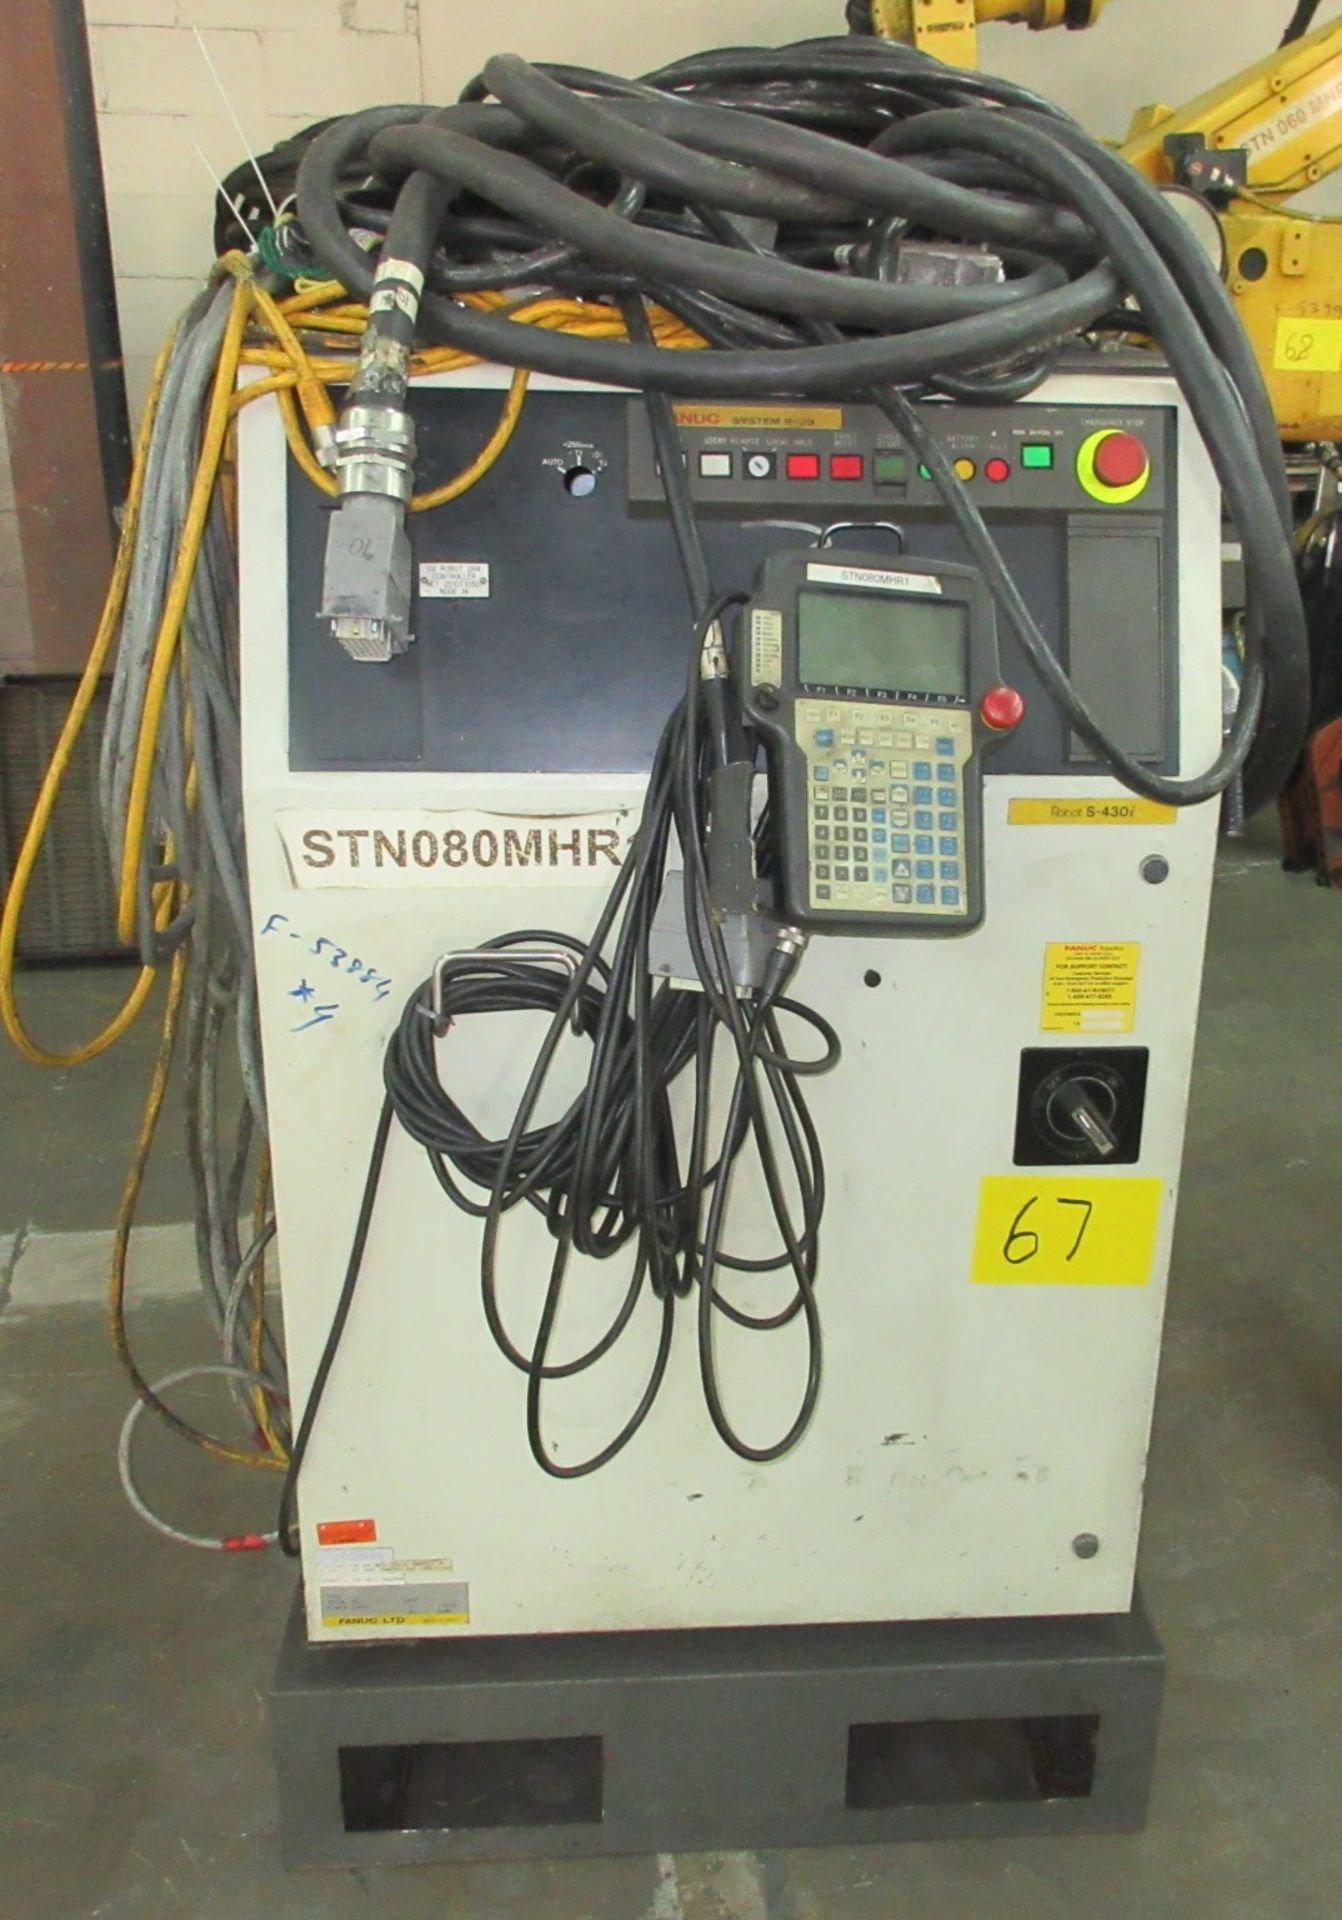 FANUC S-430IW LOADING ROBOT W/ SYSTEM RJ3 ROBOT CONTROLLER, CABLES AND TEACH PENDANT (LOCATED IN - Image 2 of 9